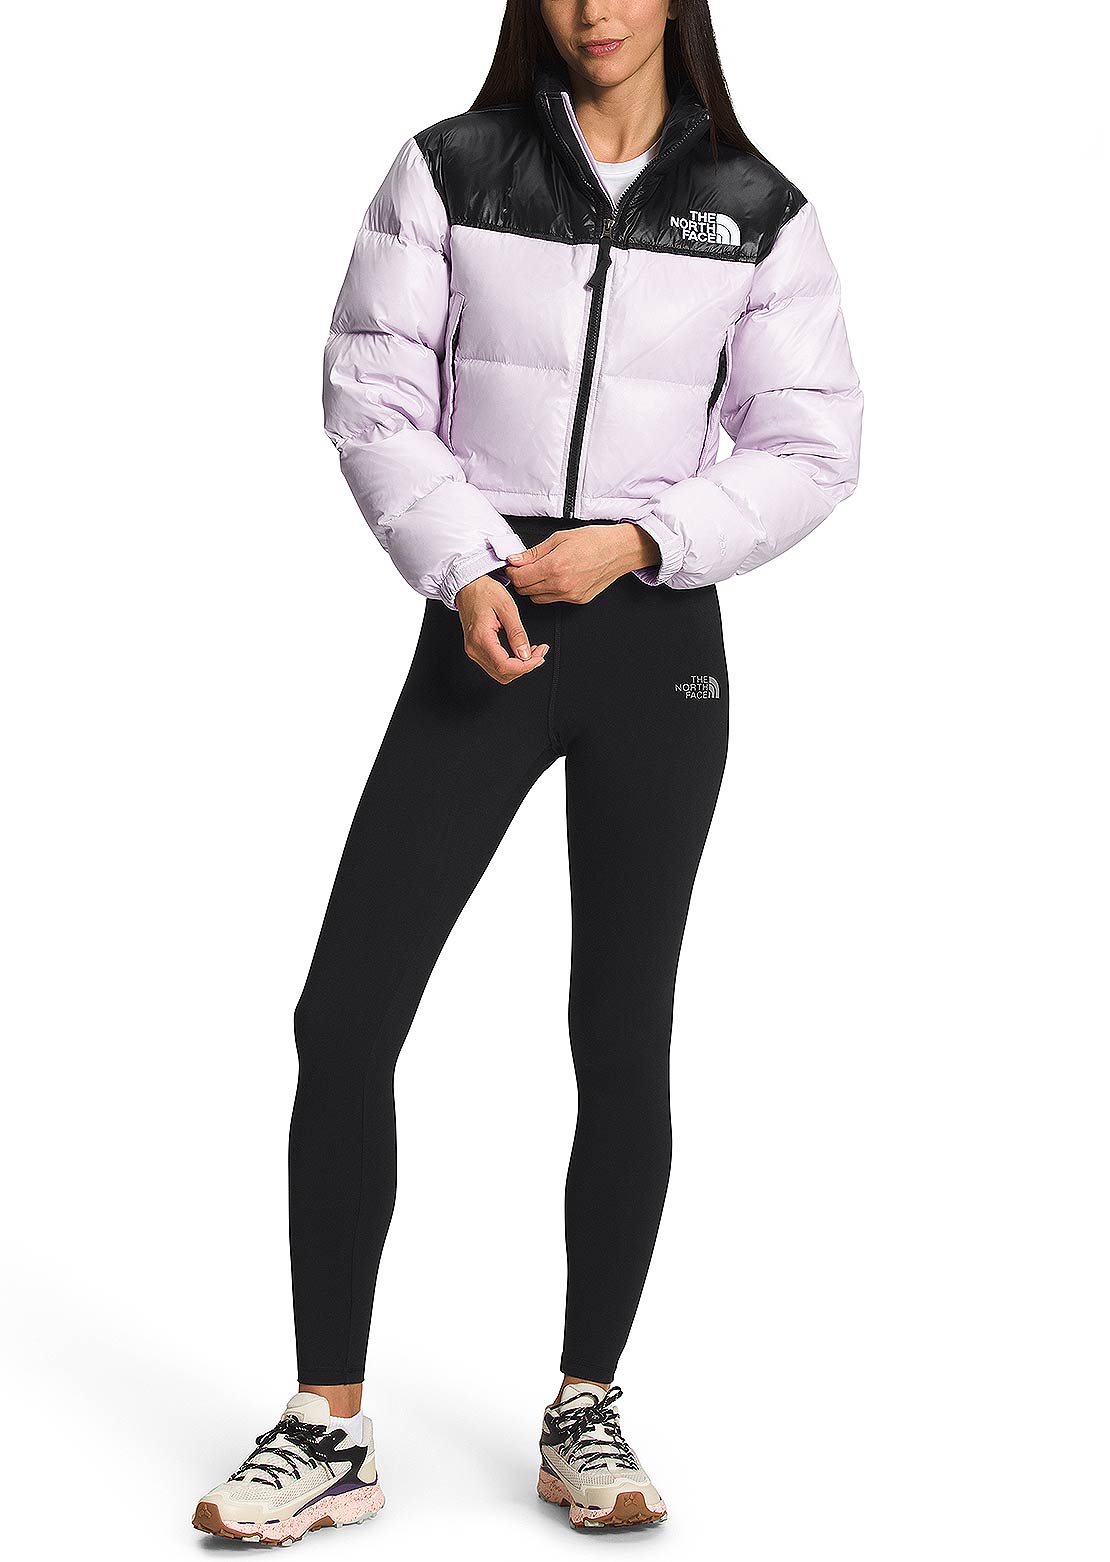  THE NORTH FACE Women's Winter Warm Jacket, Lavender Fog,  X-Small : Clothing, Shoes & Jewelry